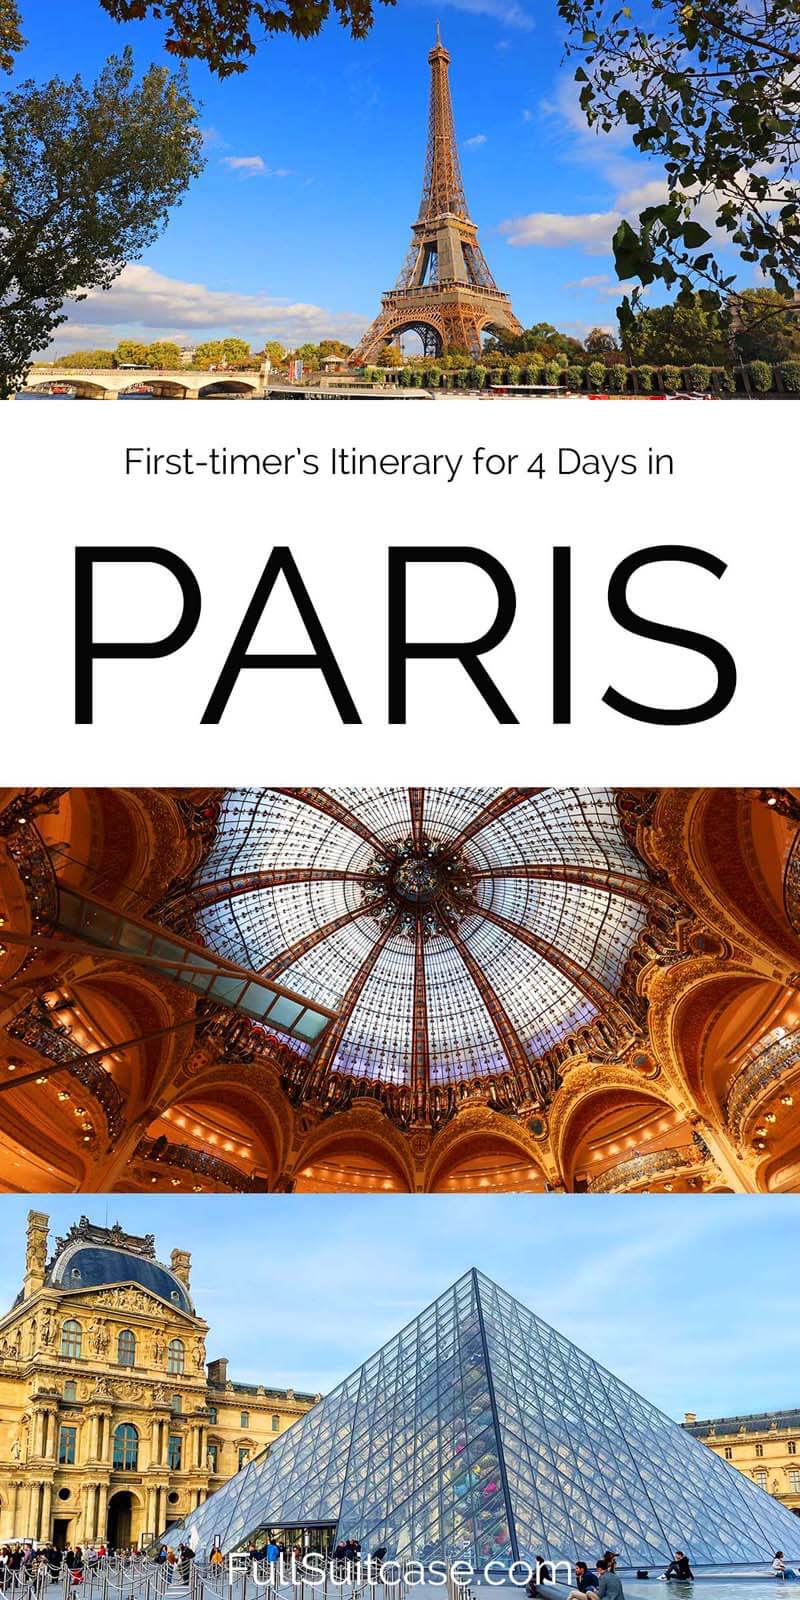 Paris 4 days itinerary - perfect for first visit